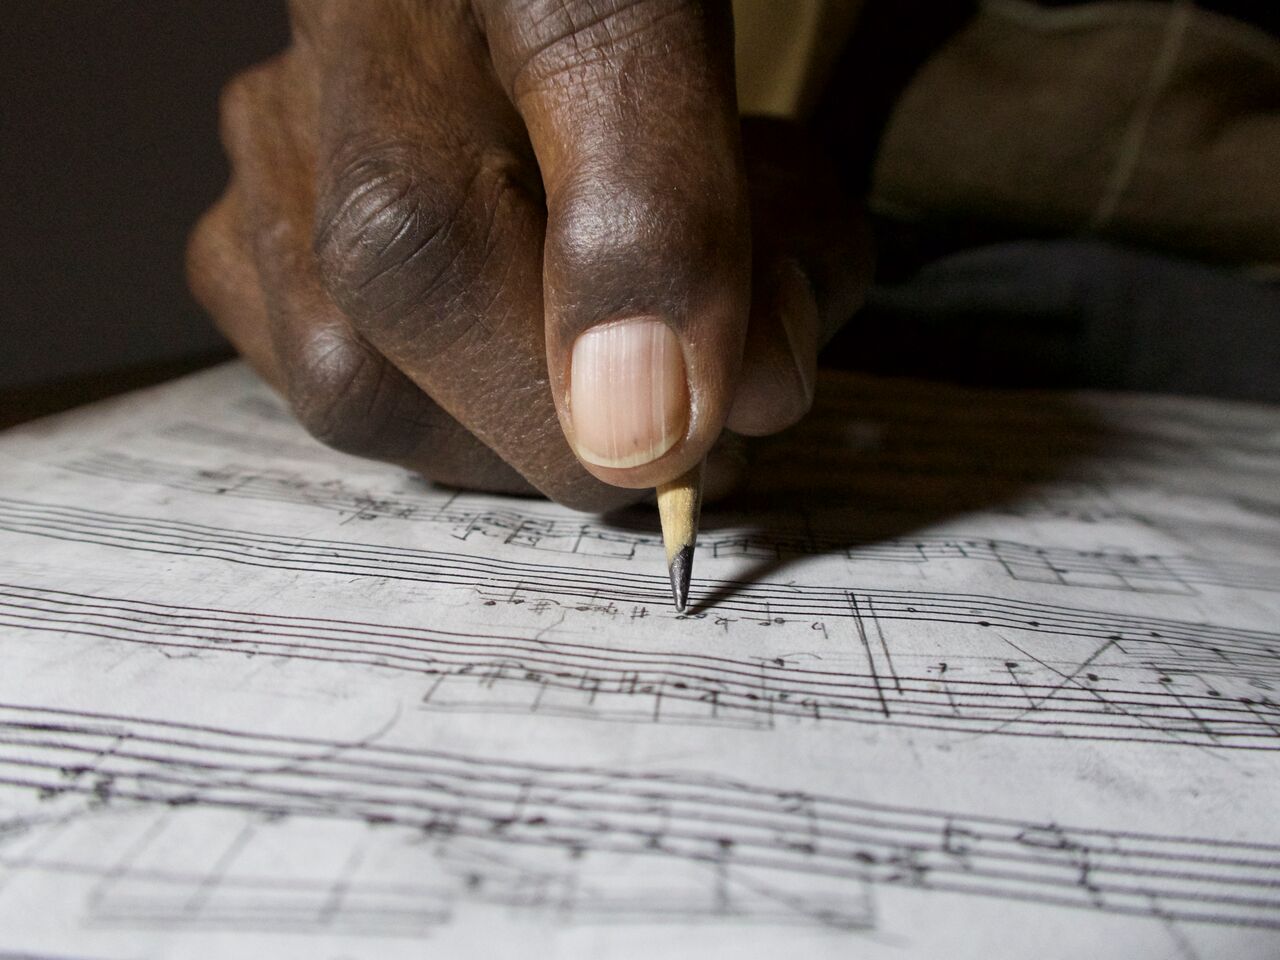 George Walker's hand holding a pencil and writing on a page of music notation paper.